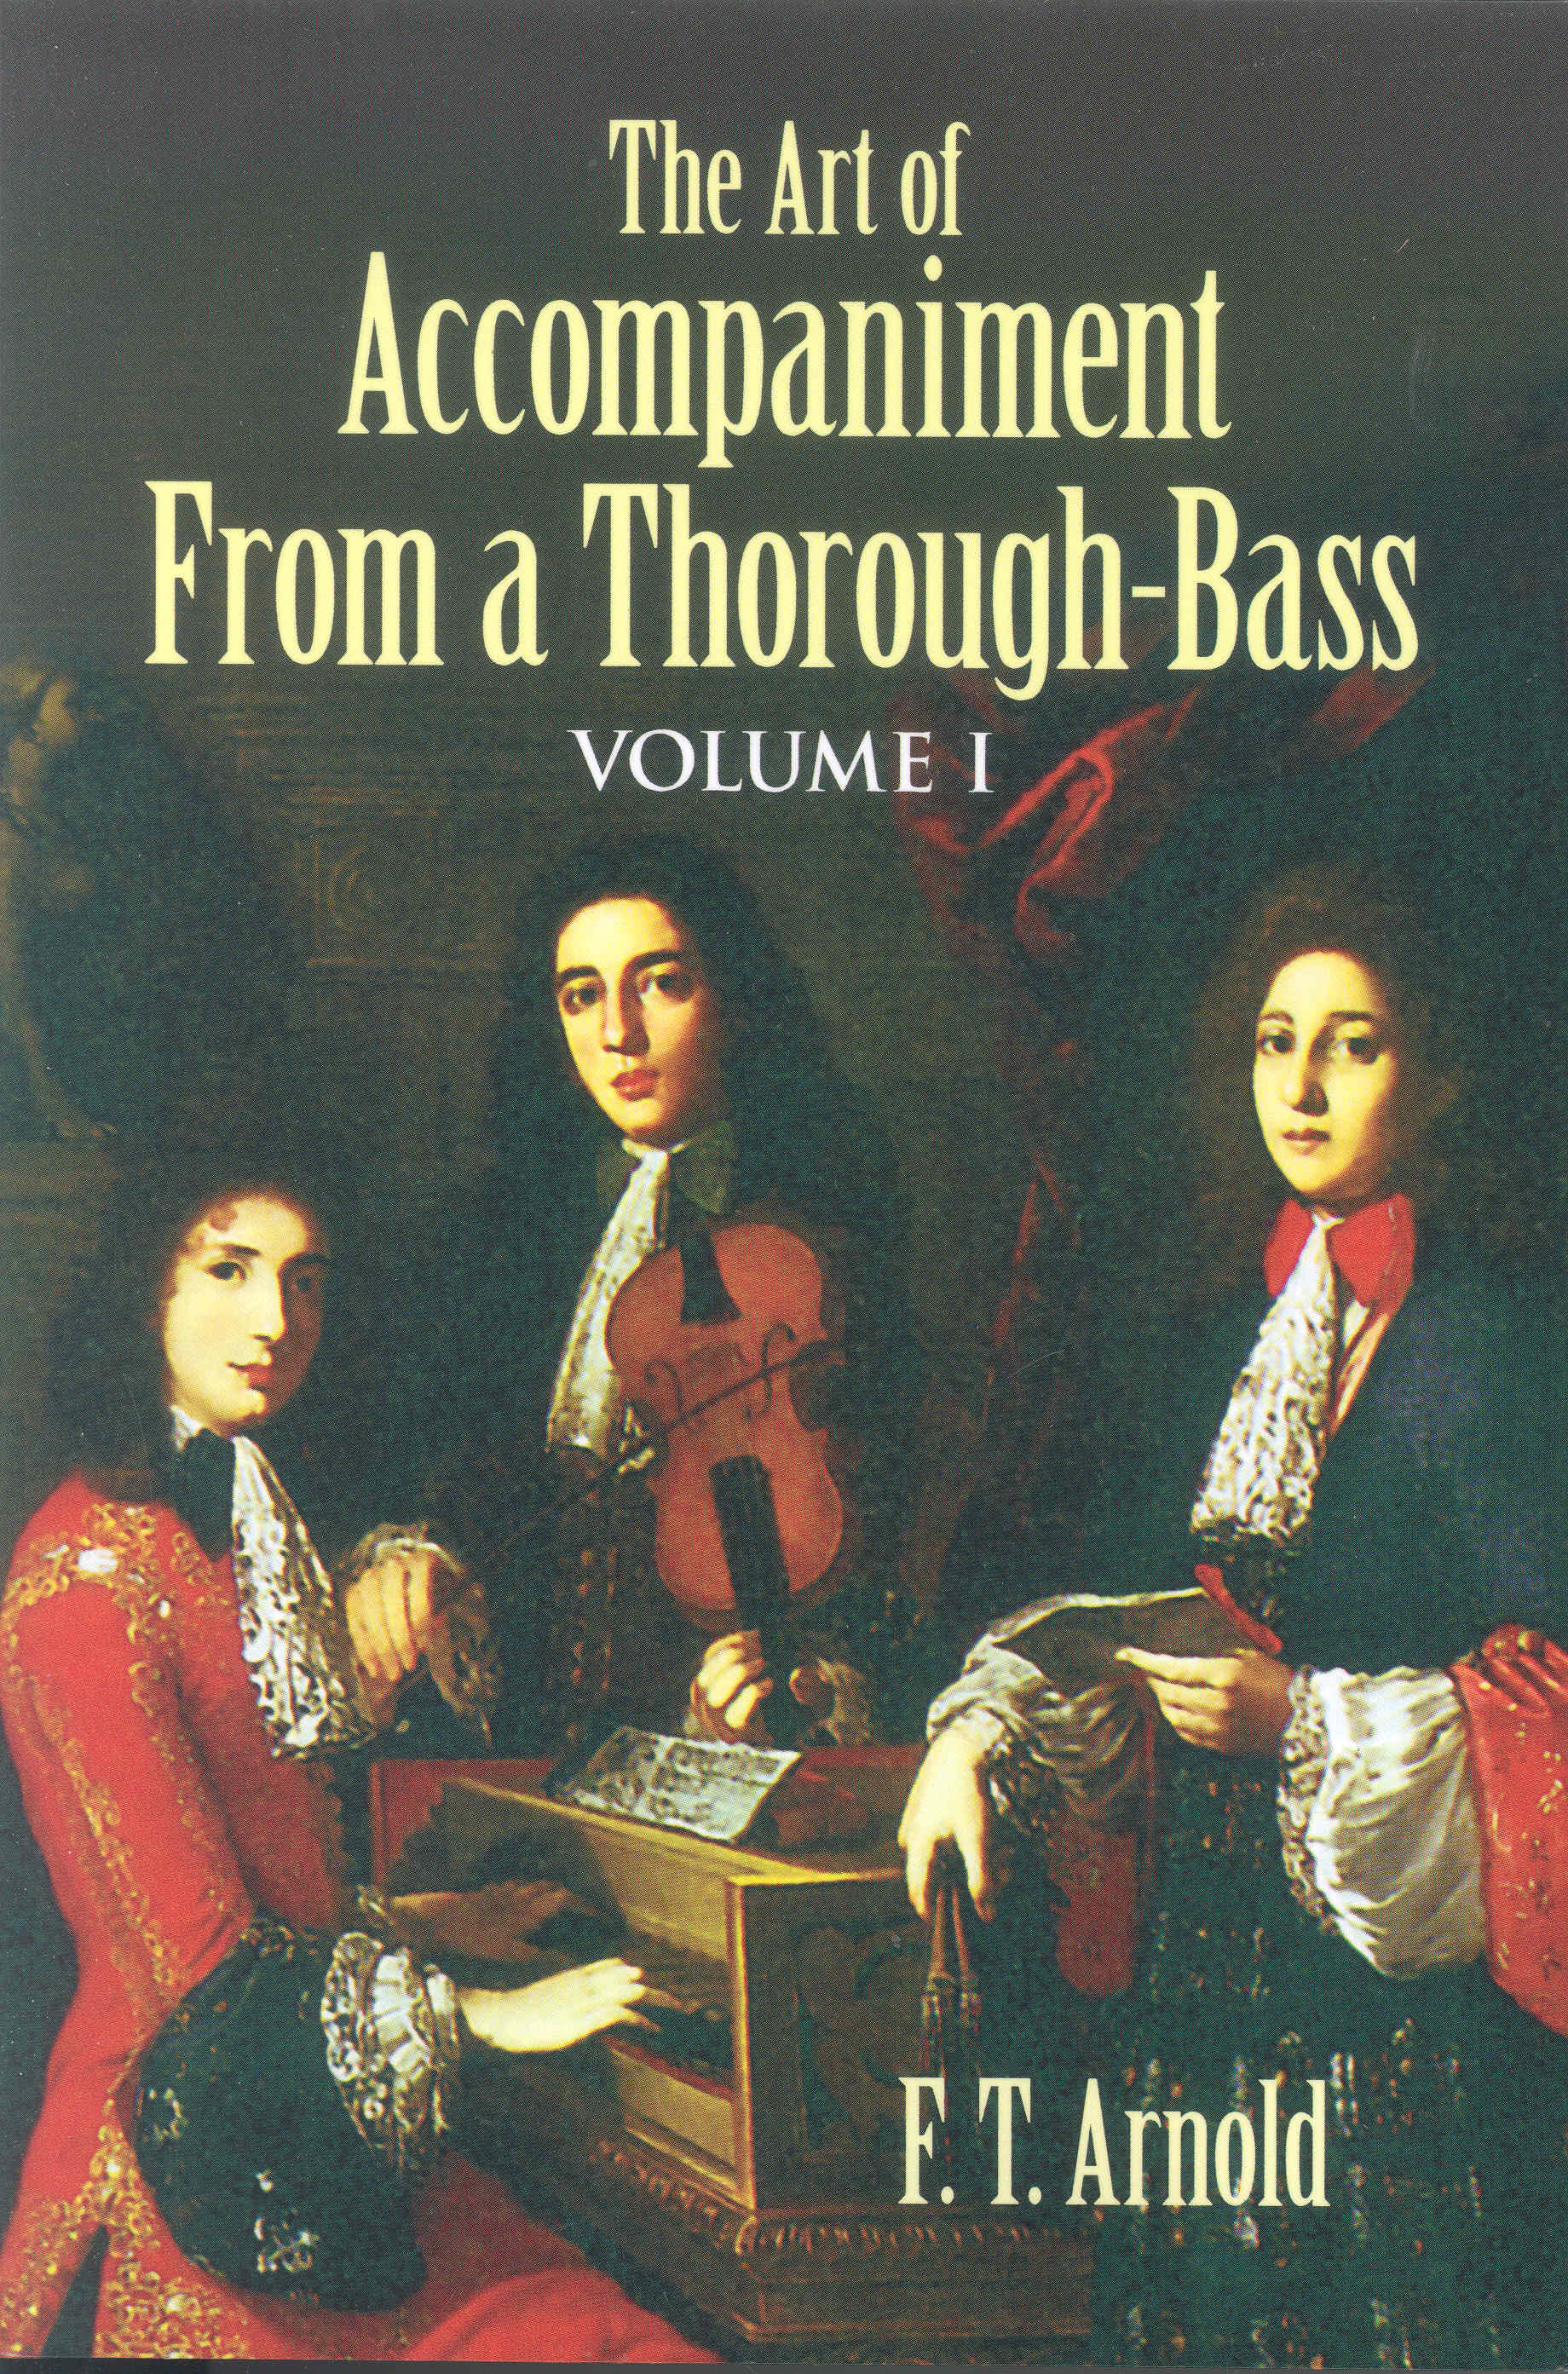 Art Of Accompaniment From A Thorough-bass Vol 1 Sheet Music Songbook